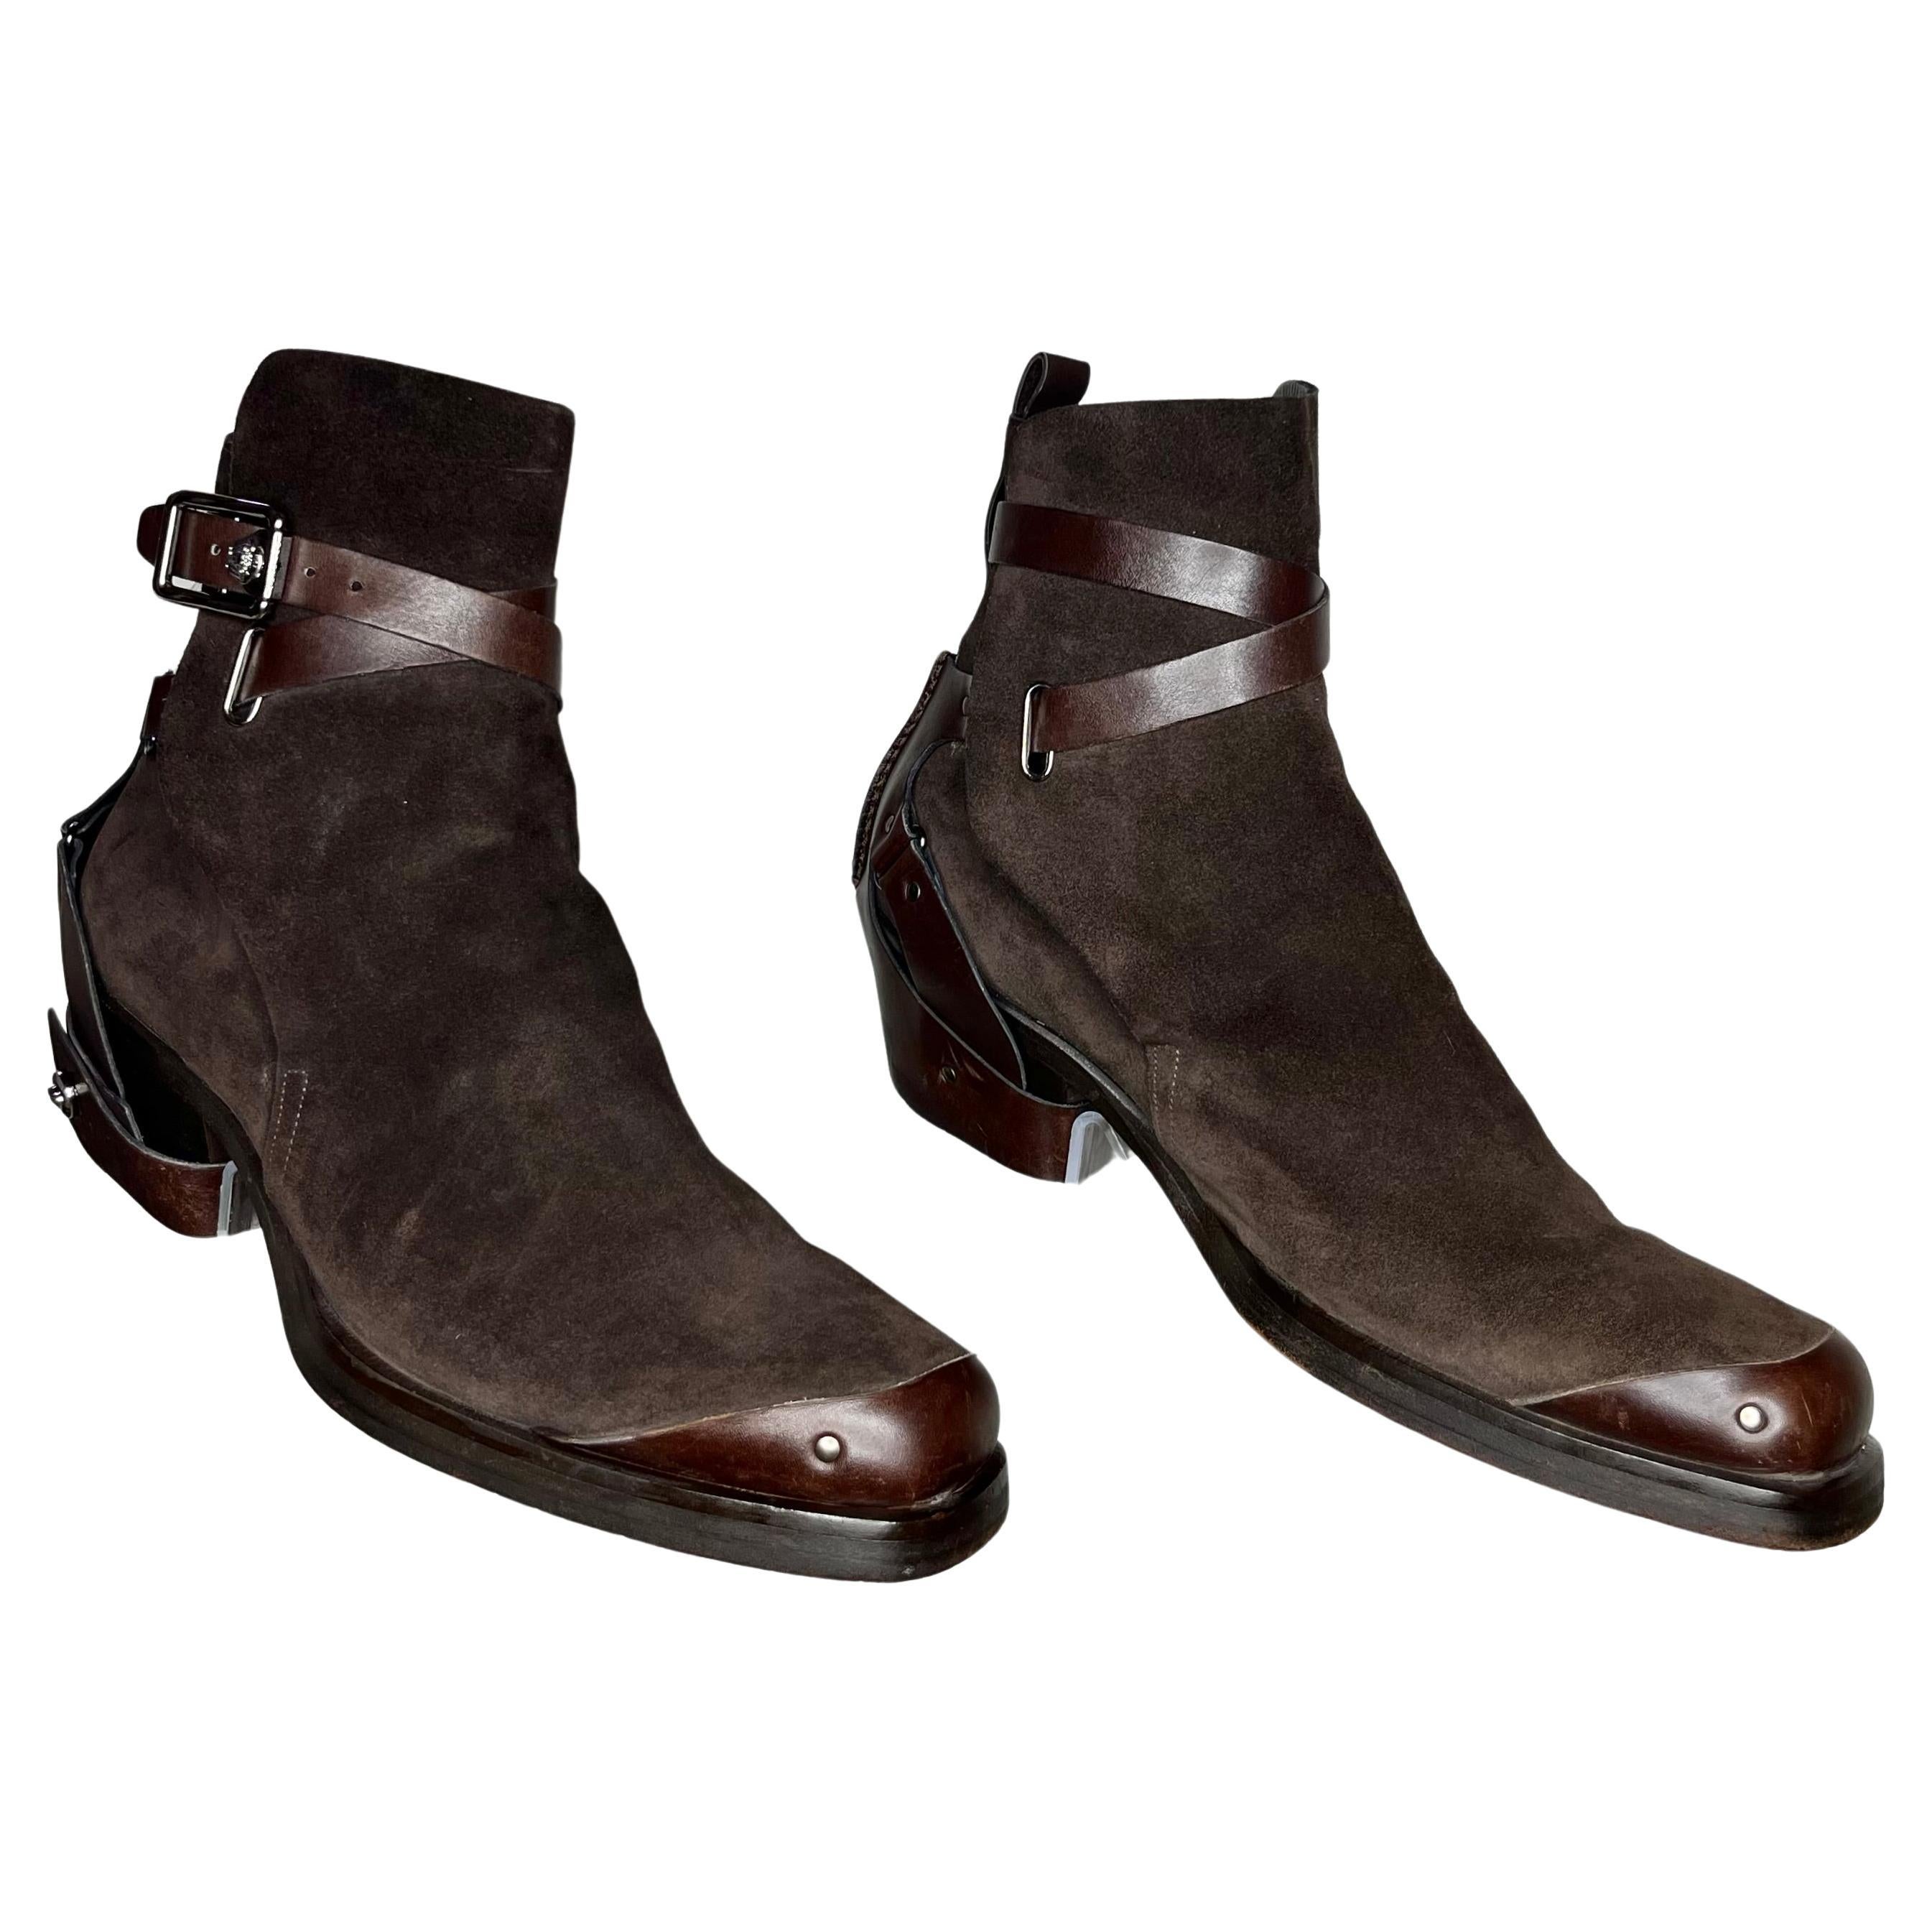 F/W 2014 L#24 VERSACE WESTERN COWBOY BROWN  LEATHER BOOTS Sz 44 - 11 For Sale